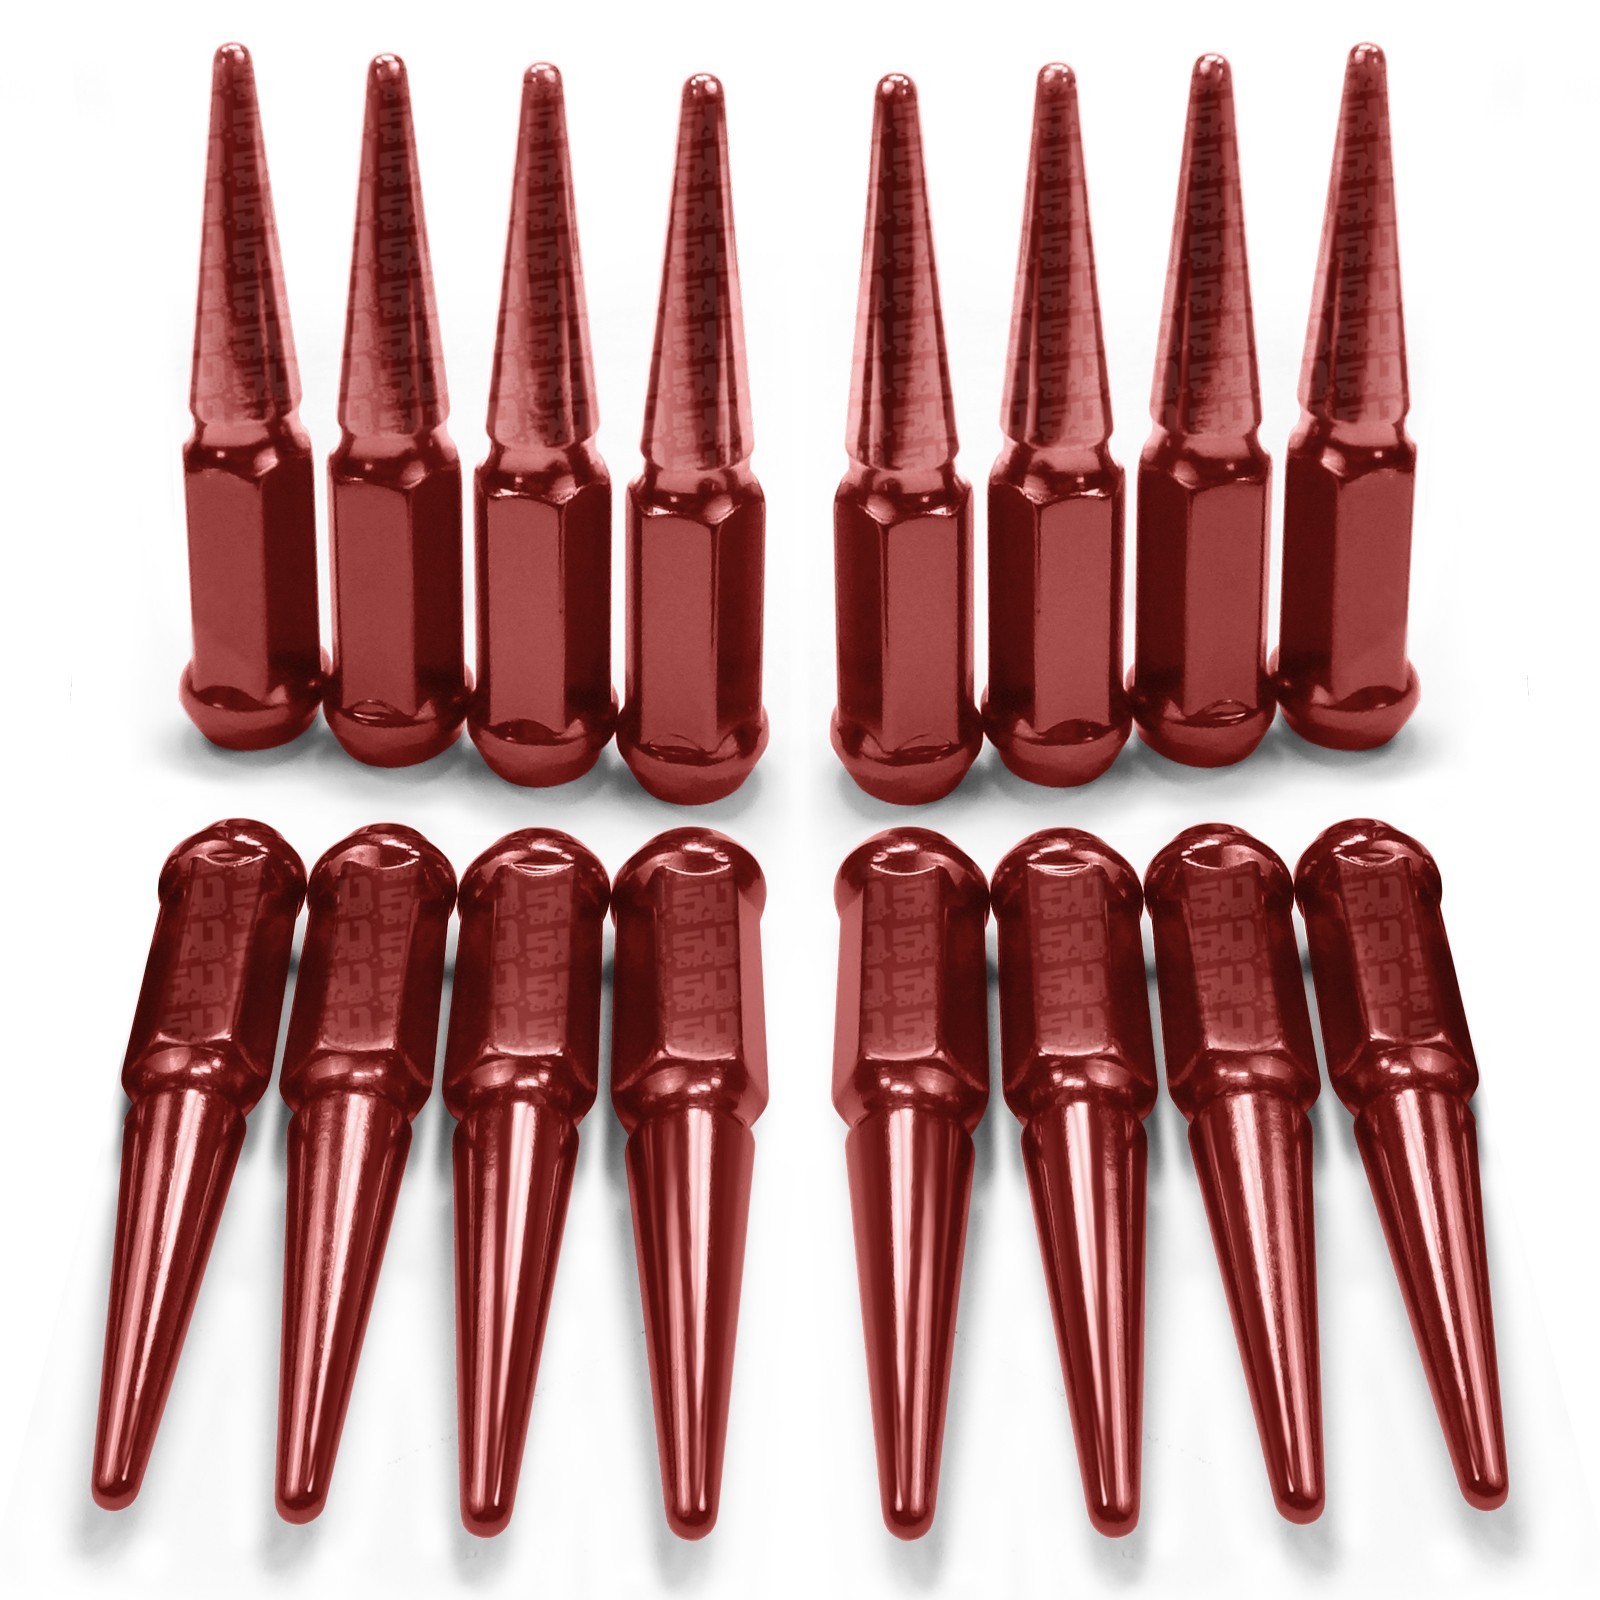 5296C1 50 Caliber Racing Set of 16 Solid Steel Spiked Lugs Nut Kit 10 x 1.25mm RH Thread Pitch Size fits Wheels with 60 Degree Conical Lug Nut Seats Red Finish 